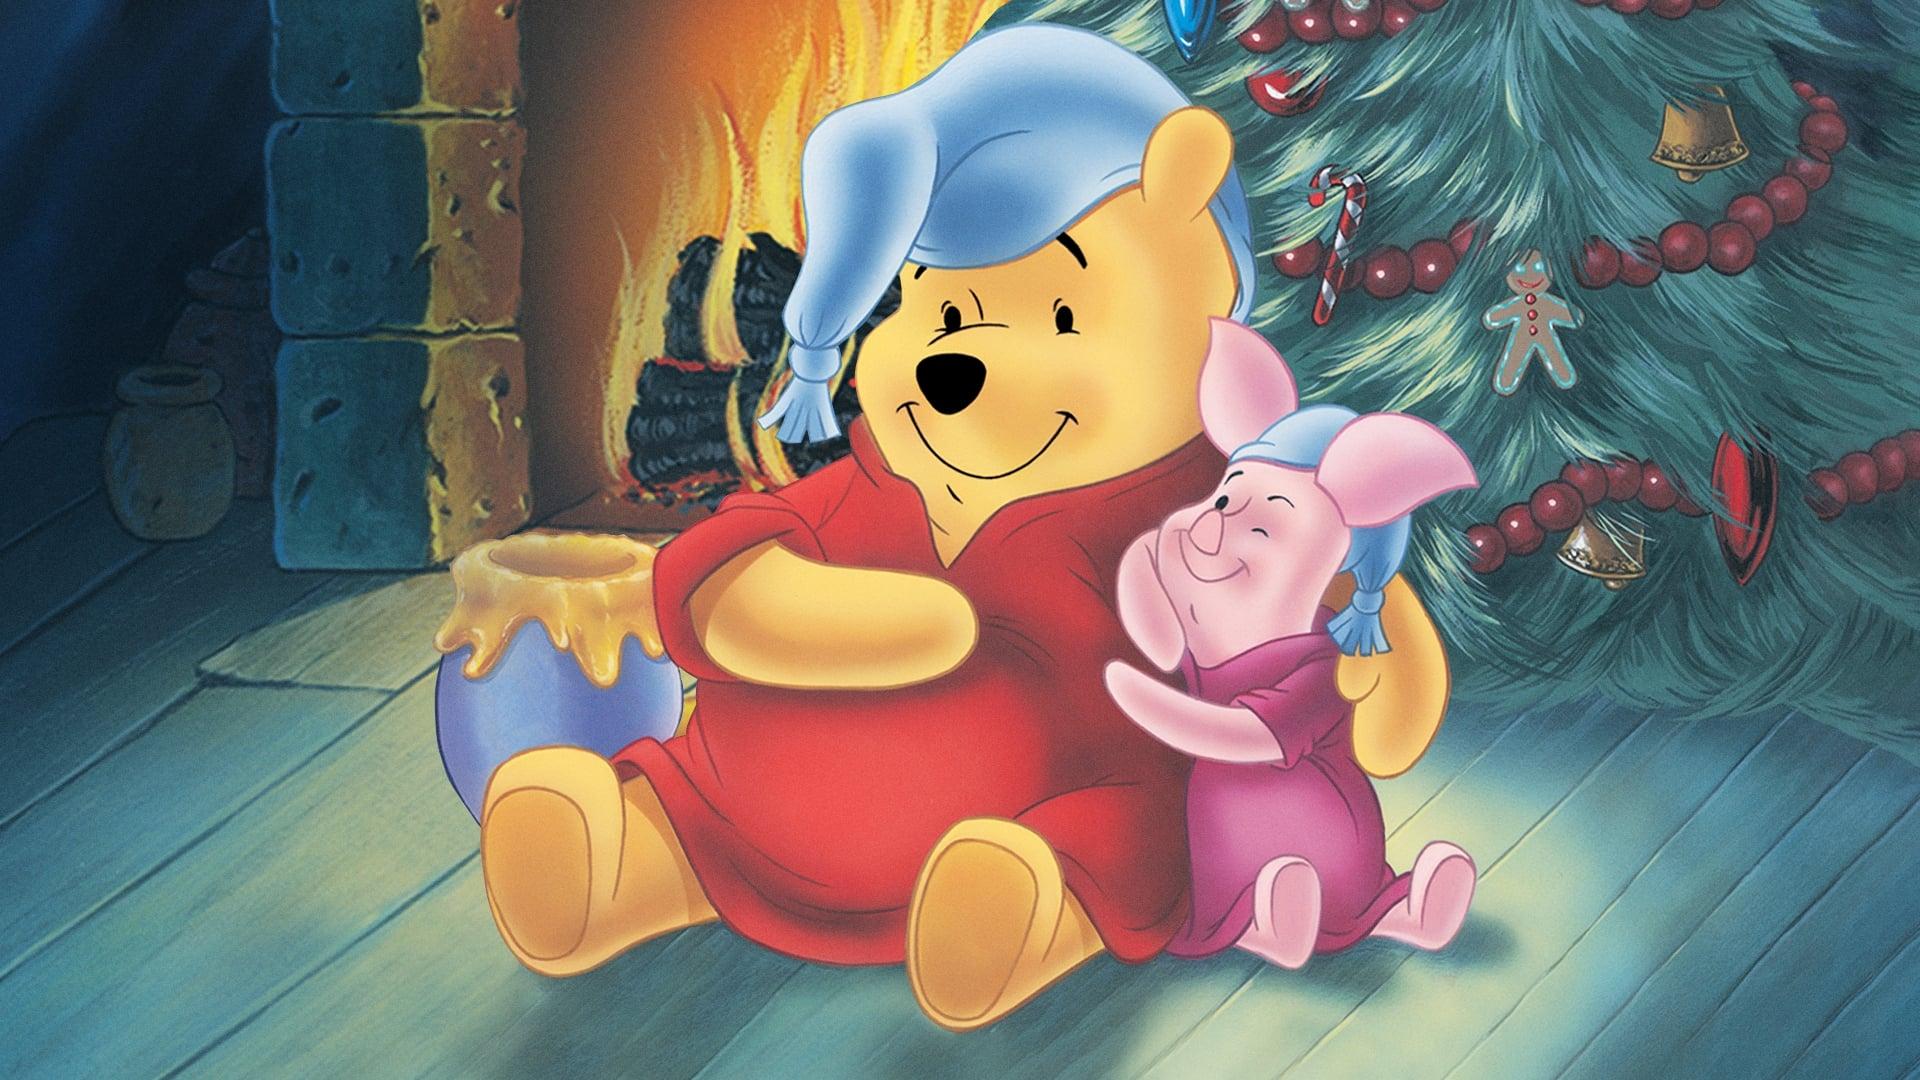 Winnie the Pooh: A Very Merry Pooh Year backdrop